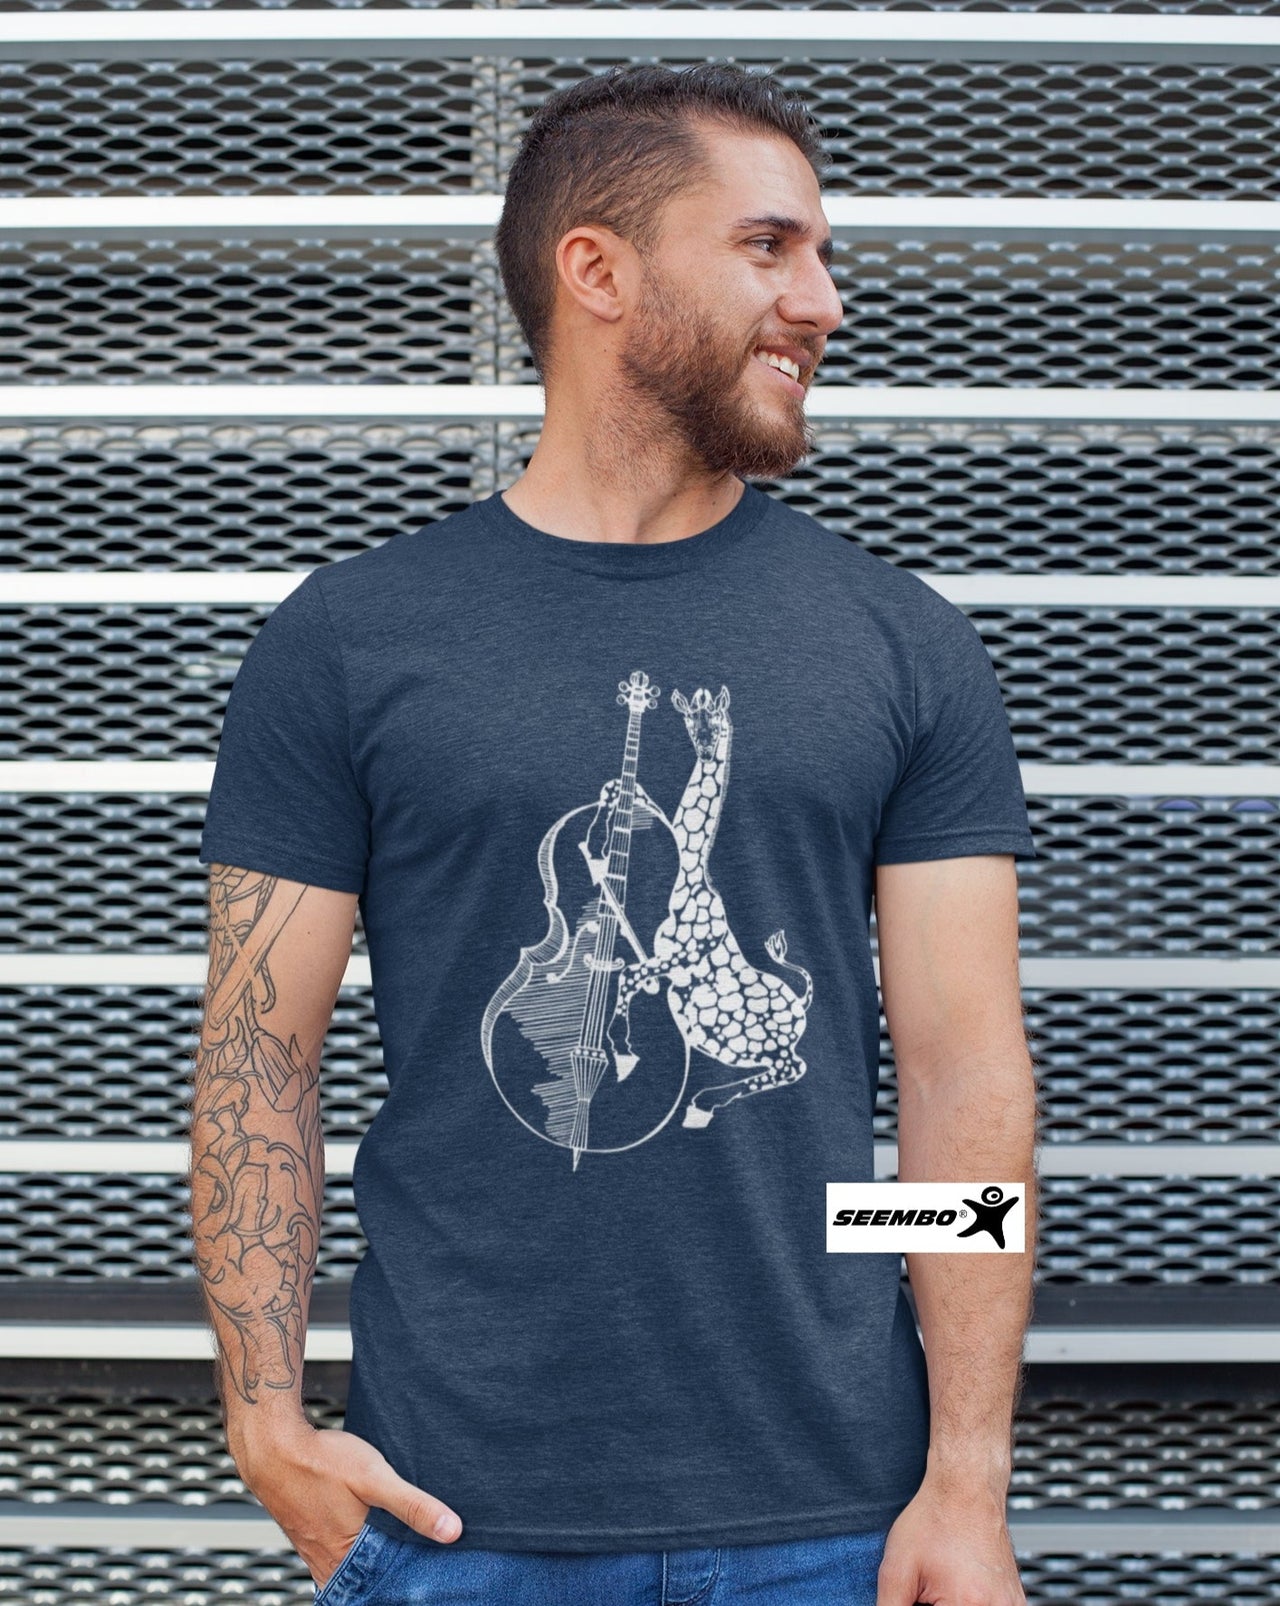 a-man-standing-with-seembo-giraffe-playing-cello-cellist-design-on-a-vintage-navy-t-shirt